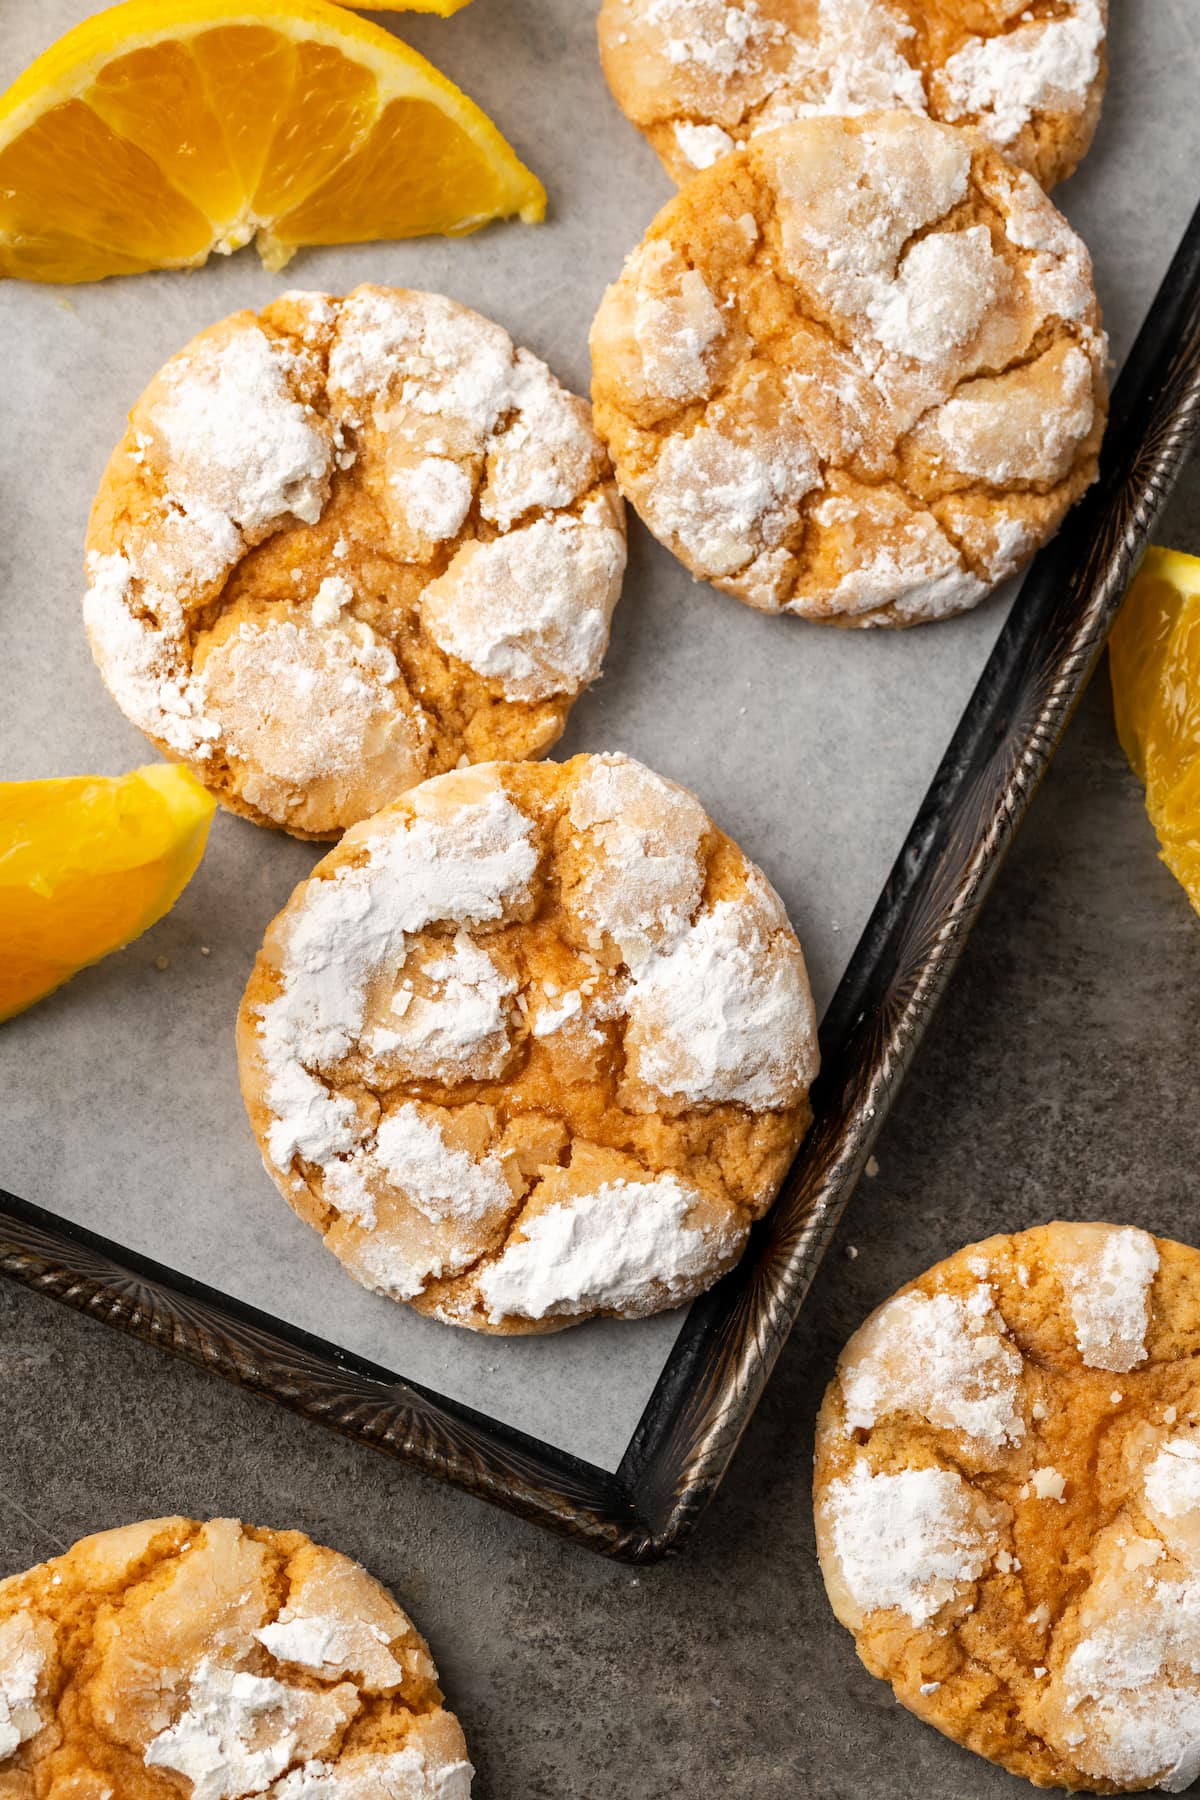 Assorted orange crinkle cookies on a lined baking sheet next to orange wedges.